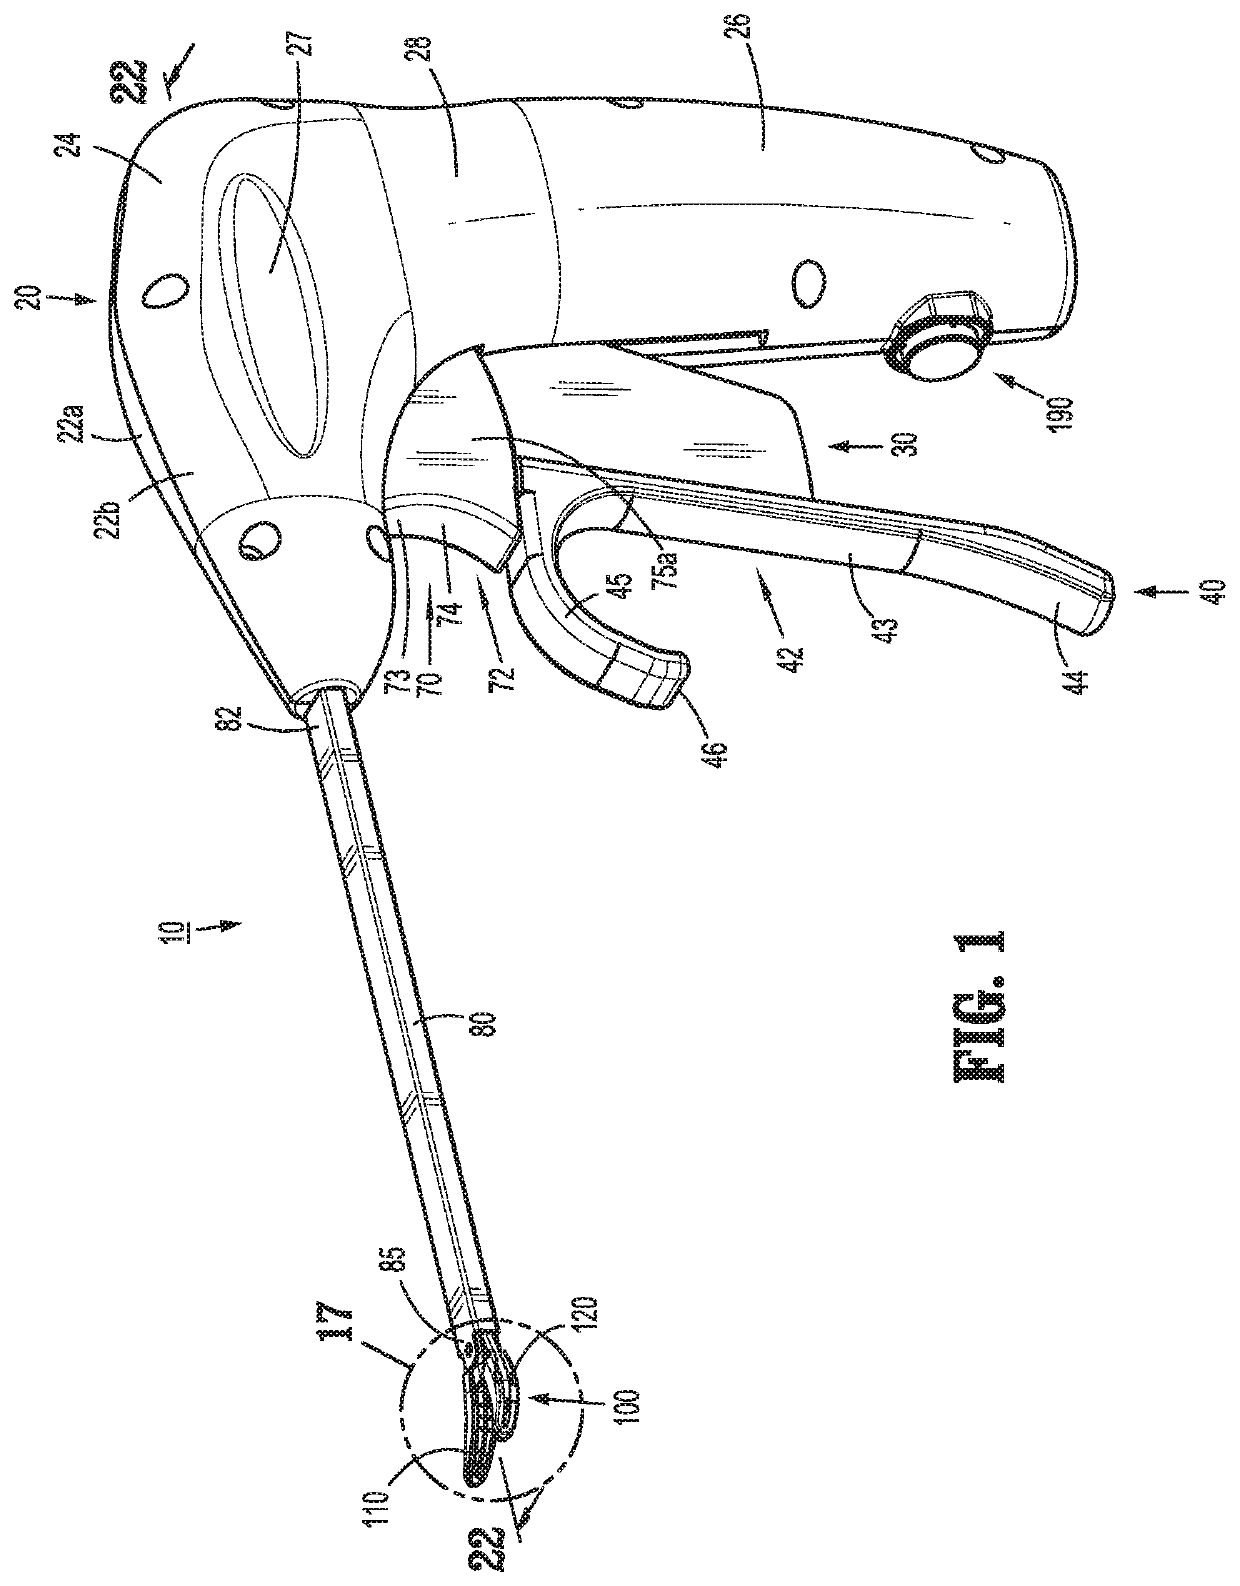 Surgical instruments and methods for performing tonsillectomy, adenoidectomy, and other surgical procedures